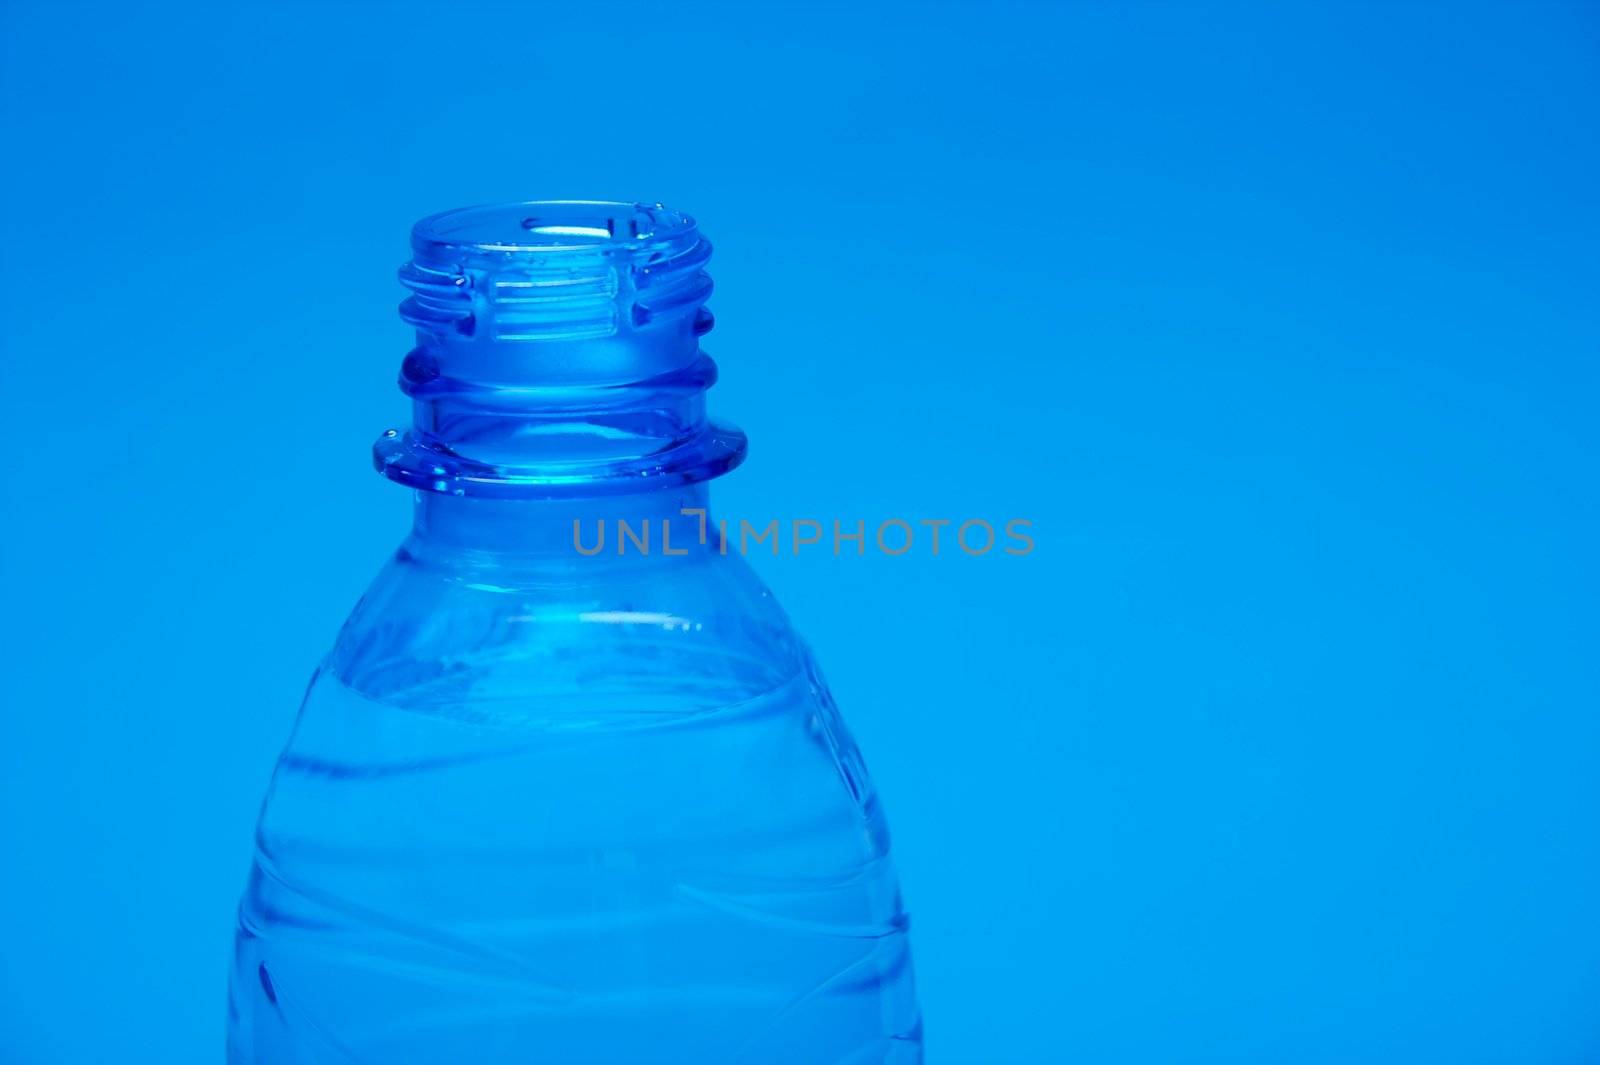 Closeup of the top part of a plastic bottle